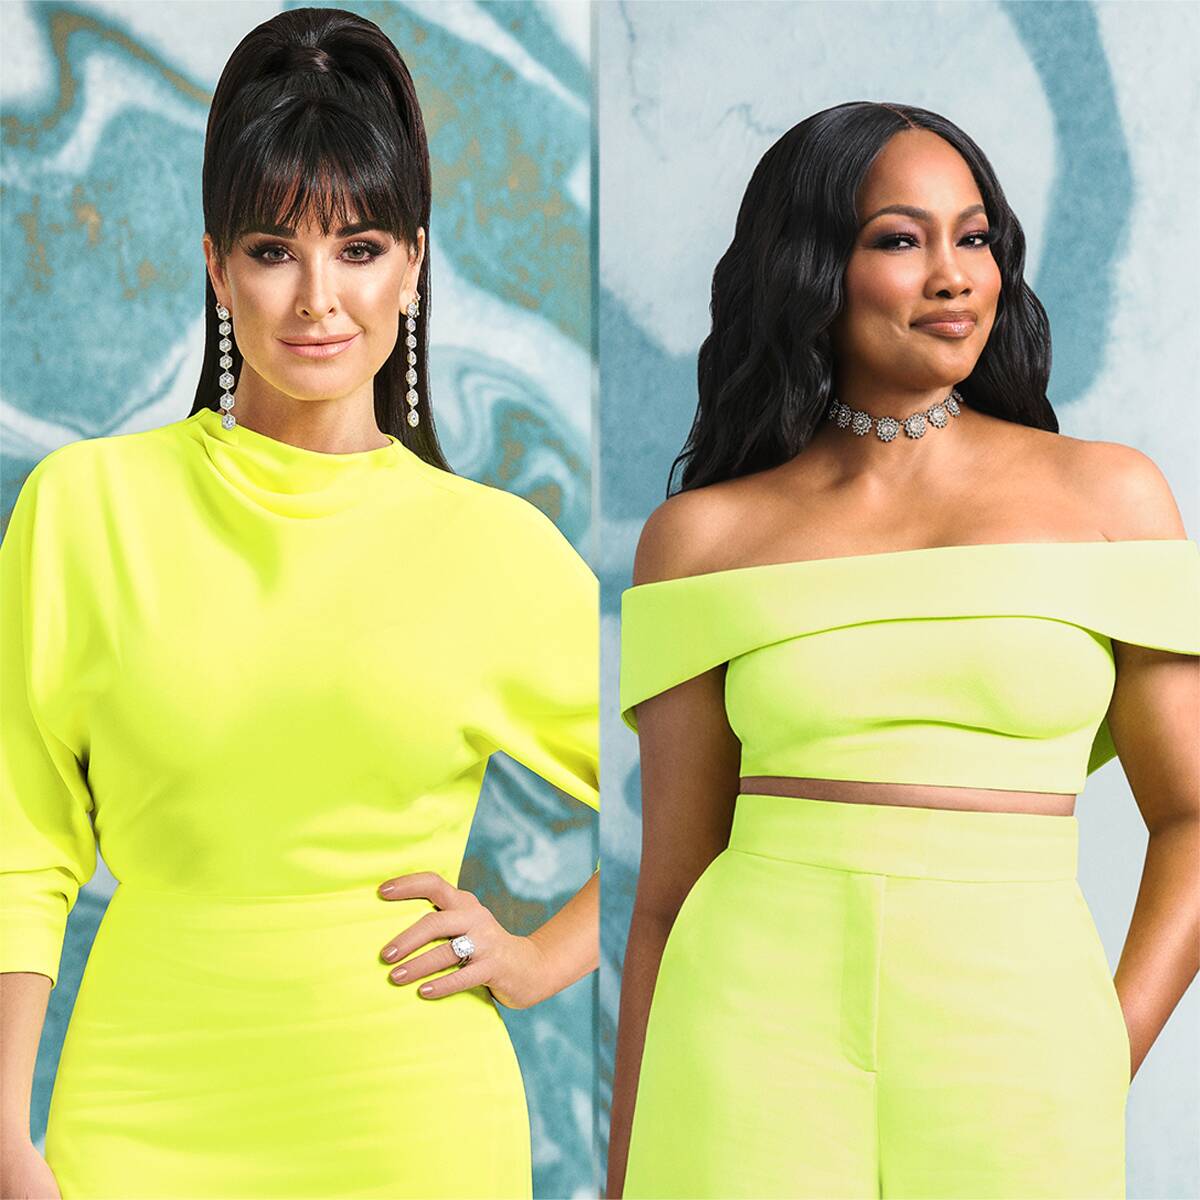 RHOBH Drama? Garcelle Beauvais Is Noticeably Absent From Kyle Richards' "New Squad" Pics